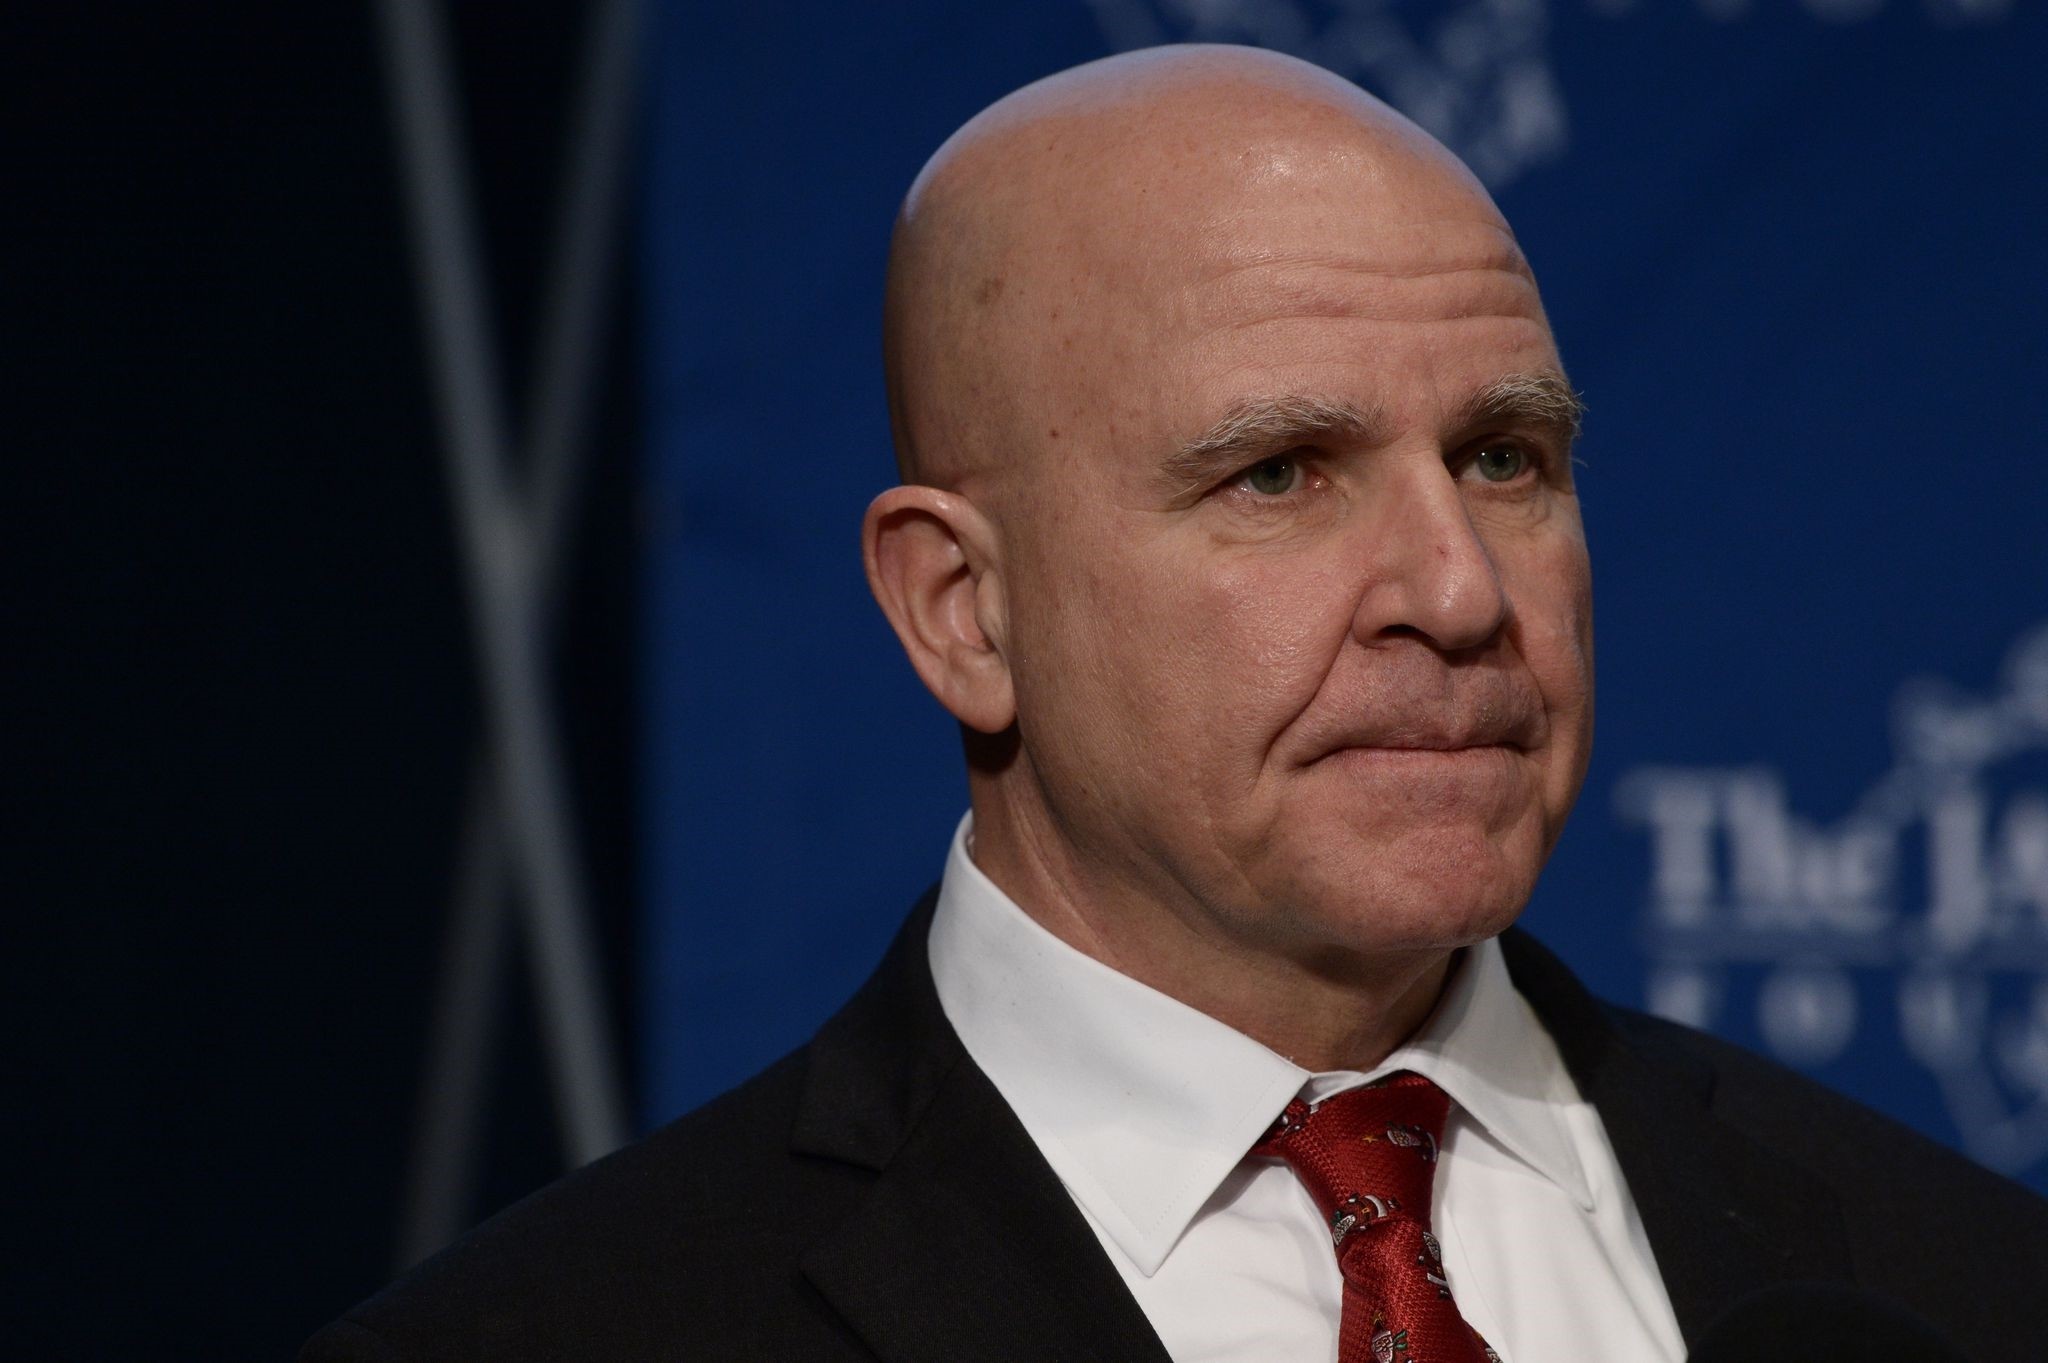 White House National Security Advisor HR McMaster gives a key note speech in front of the Jamestown Foundation in Washington, D.C., U.S., Dec. 13, 2017. (AFP Photo)